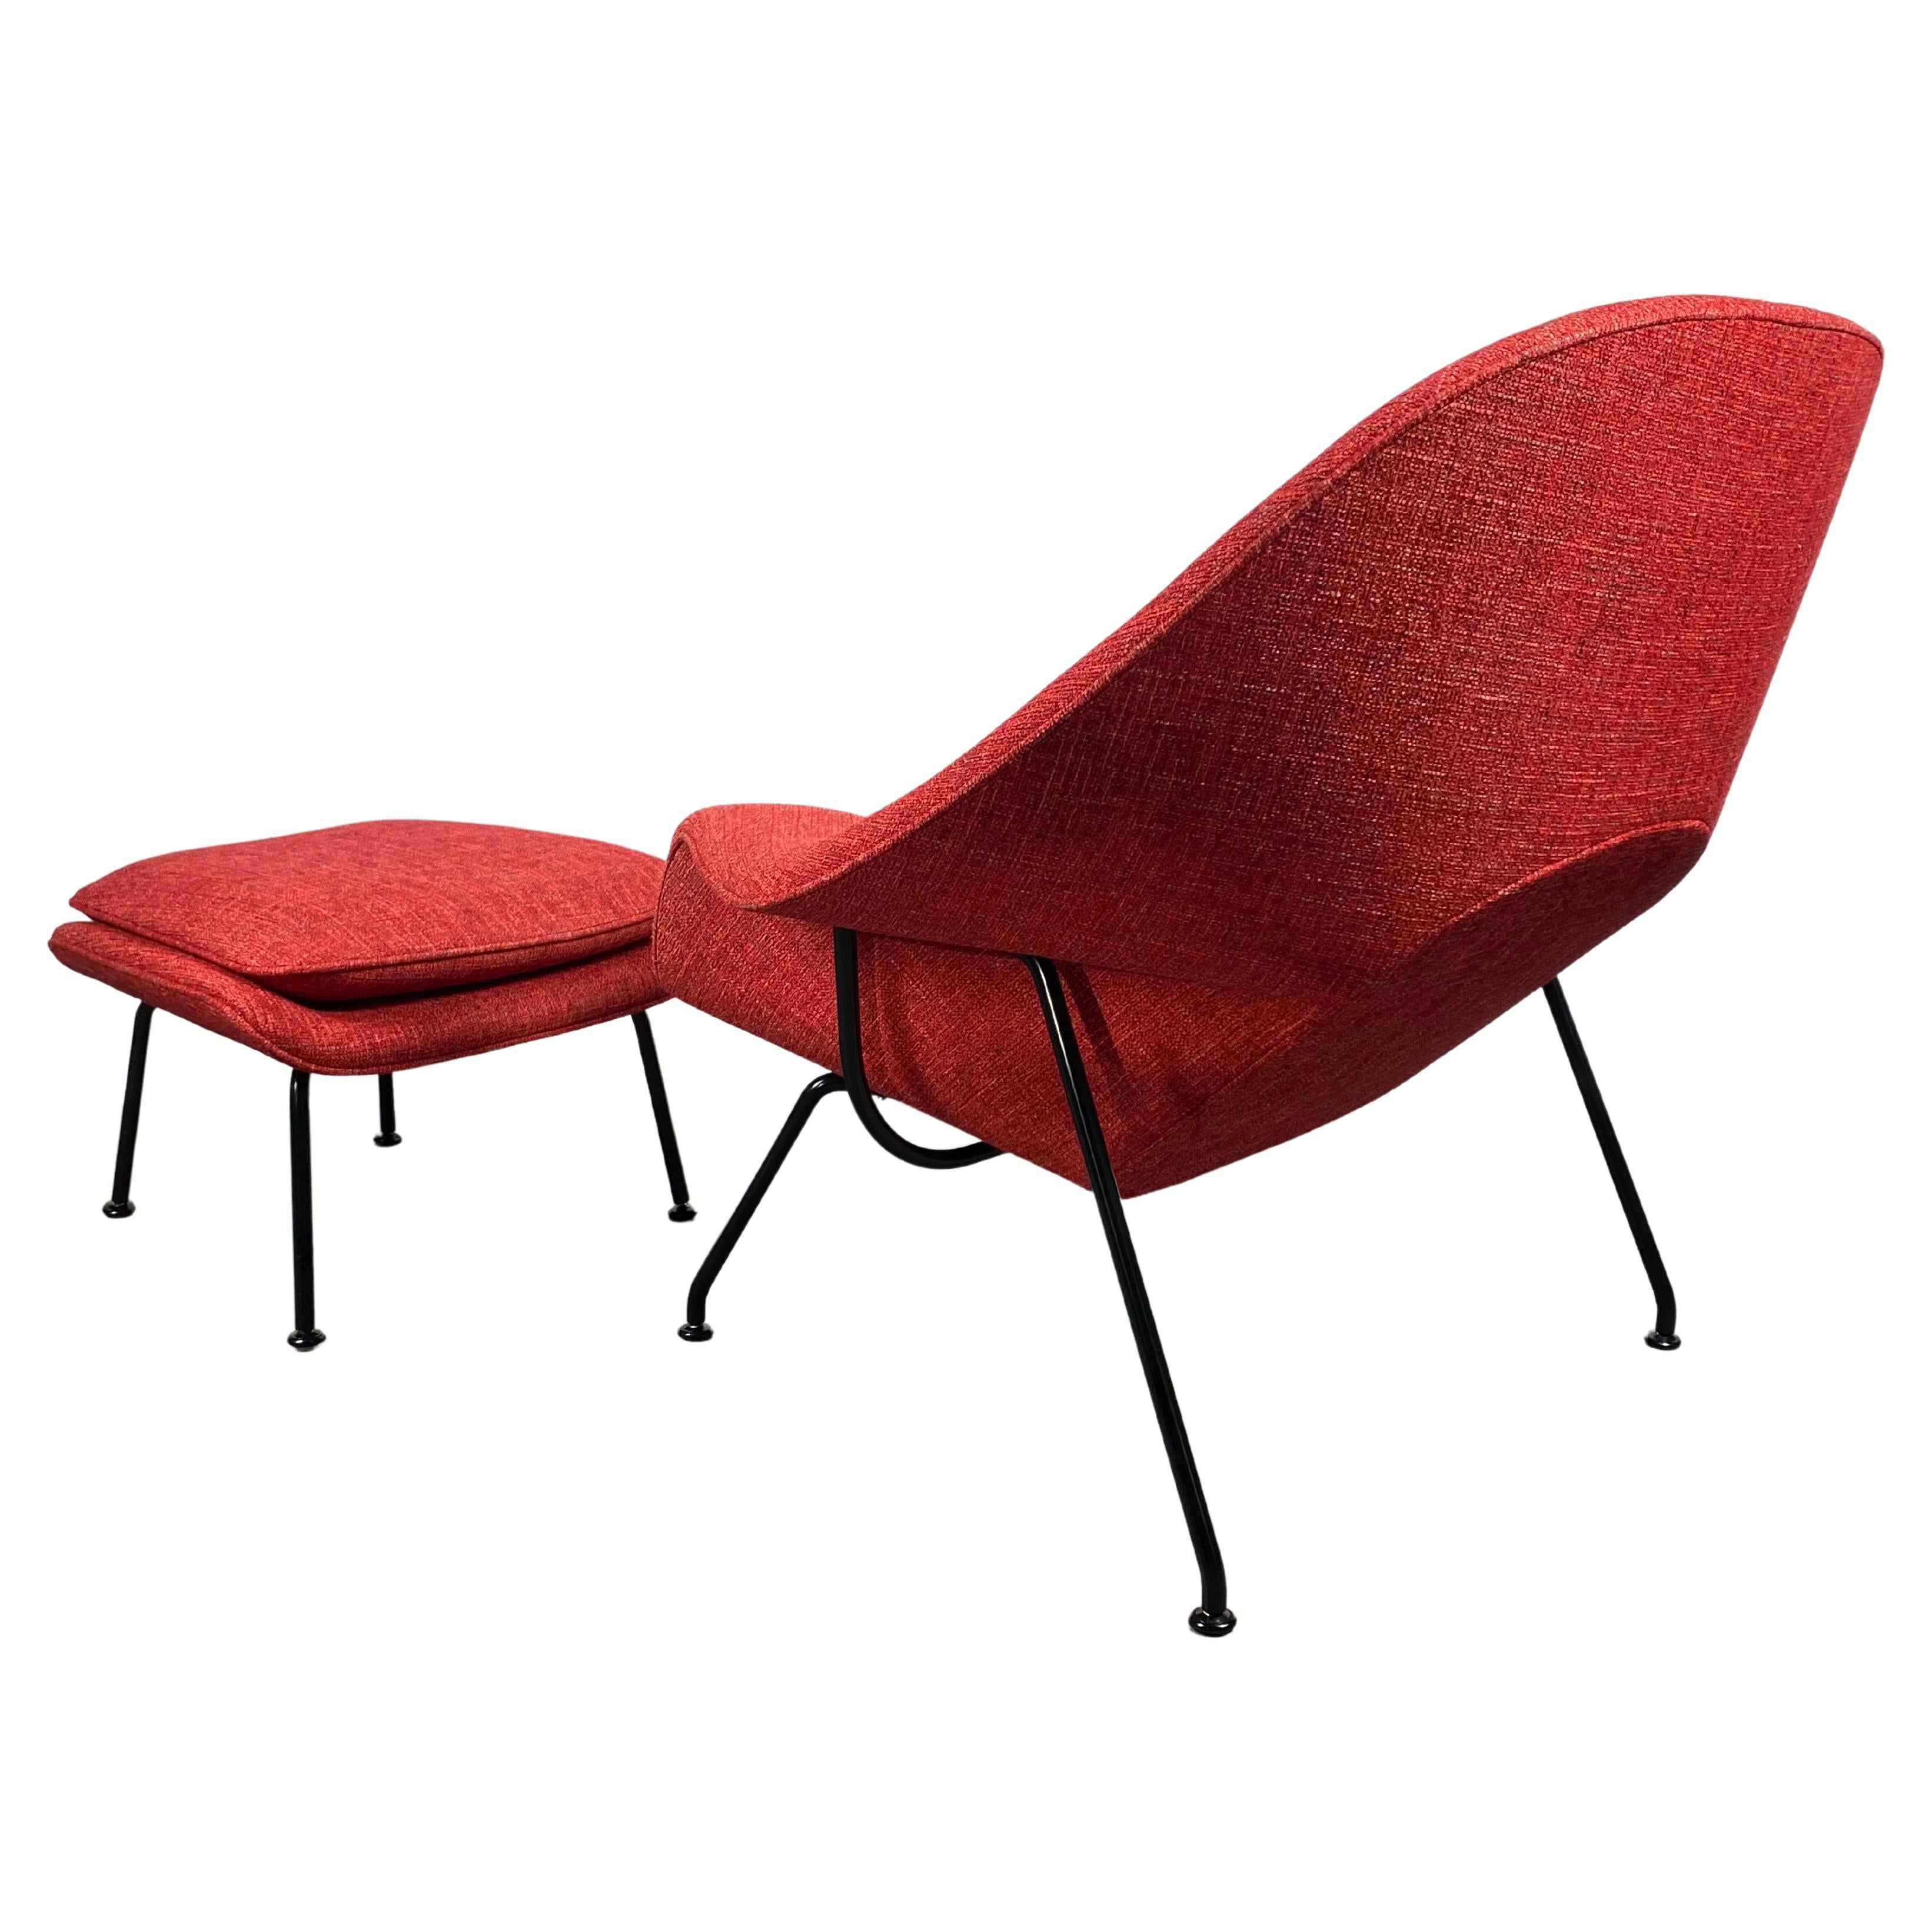 Classic Womb Chair and Ottoman by Eero Saaarinen Manufactured by Knoll, 'Medium'